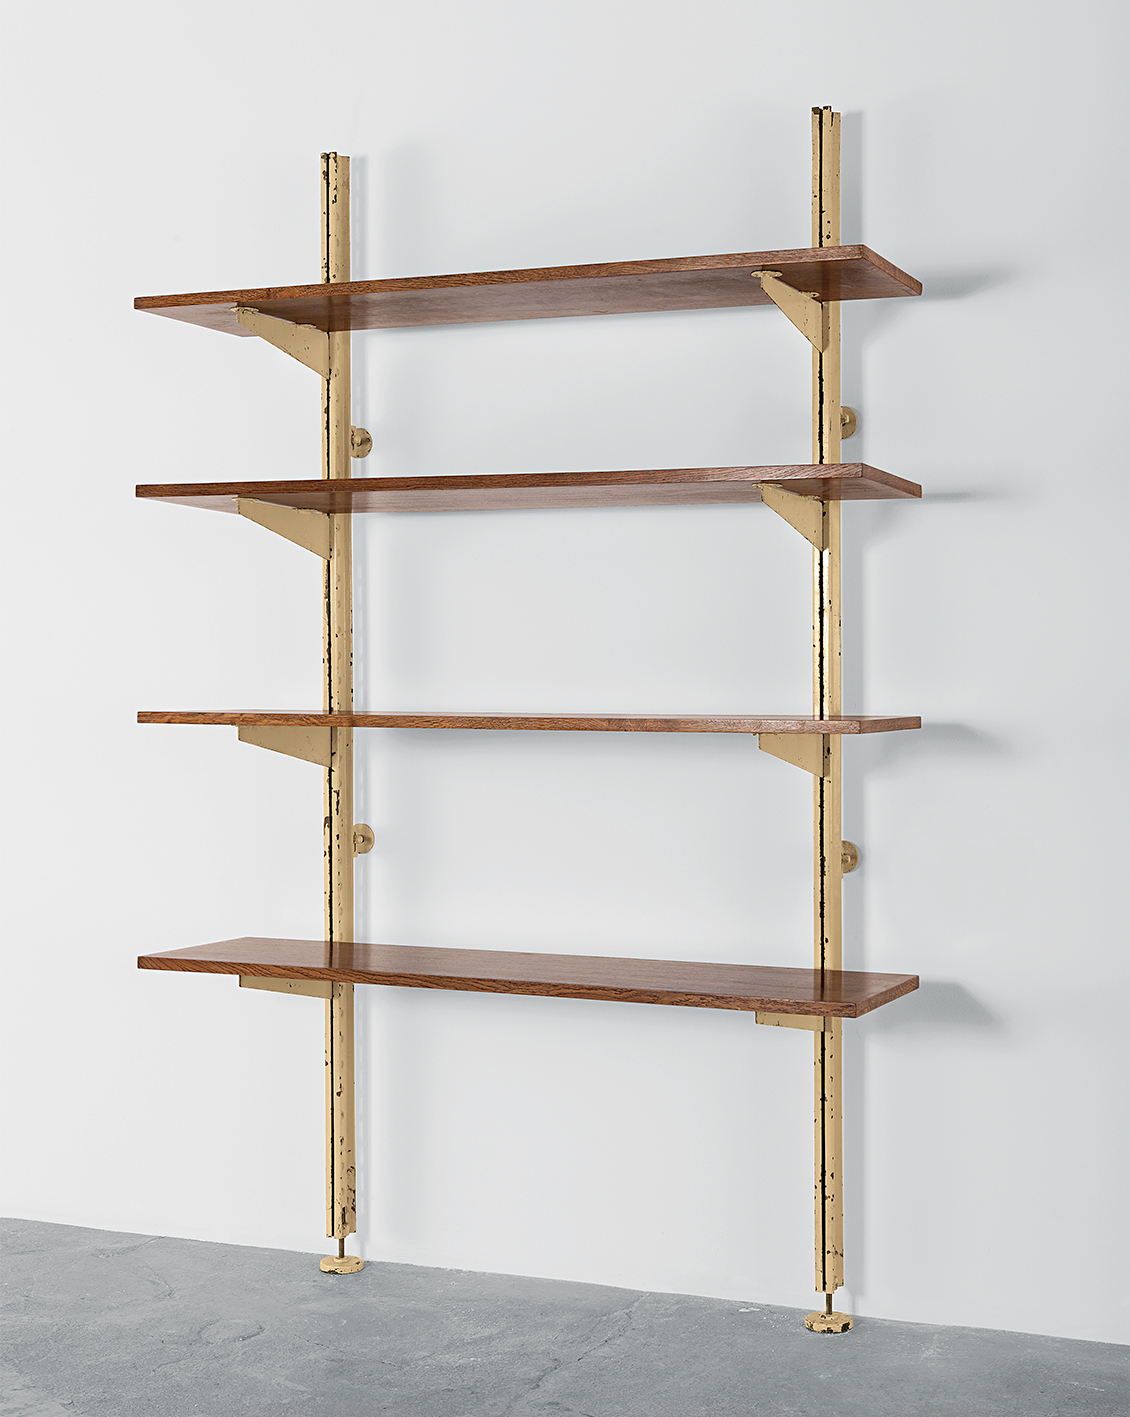 Shelves with support-channels and brackets, on pistons, ca. 1949. Provenance: Ferembal factory offices, Nancy.